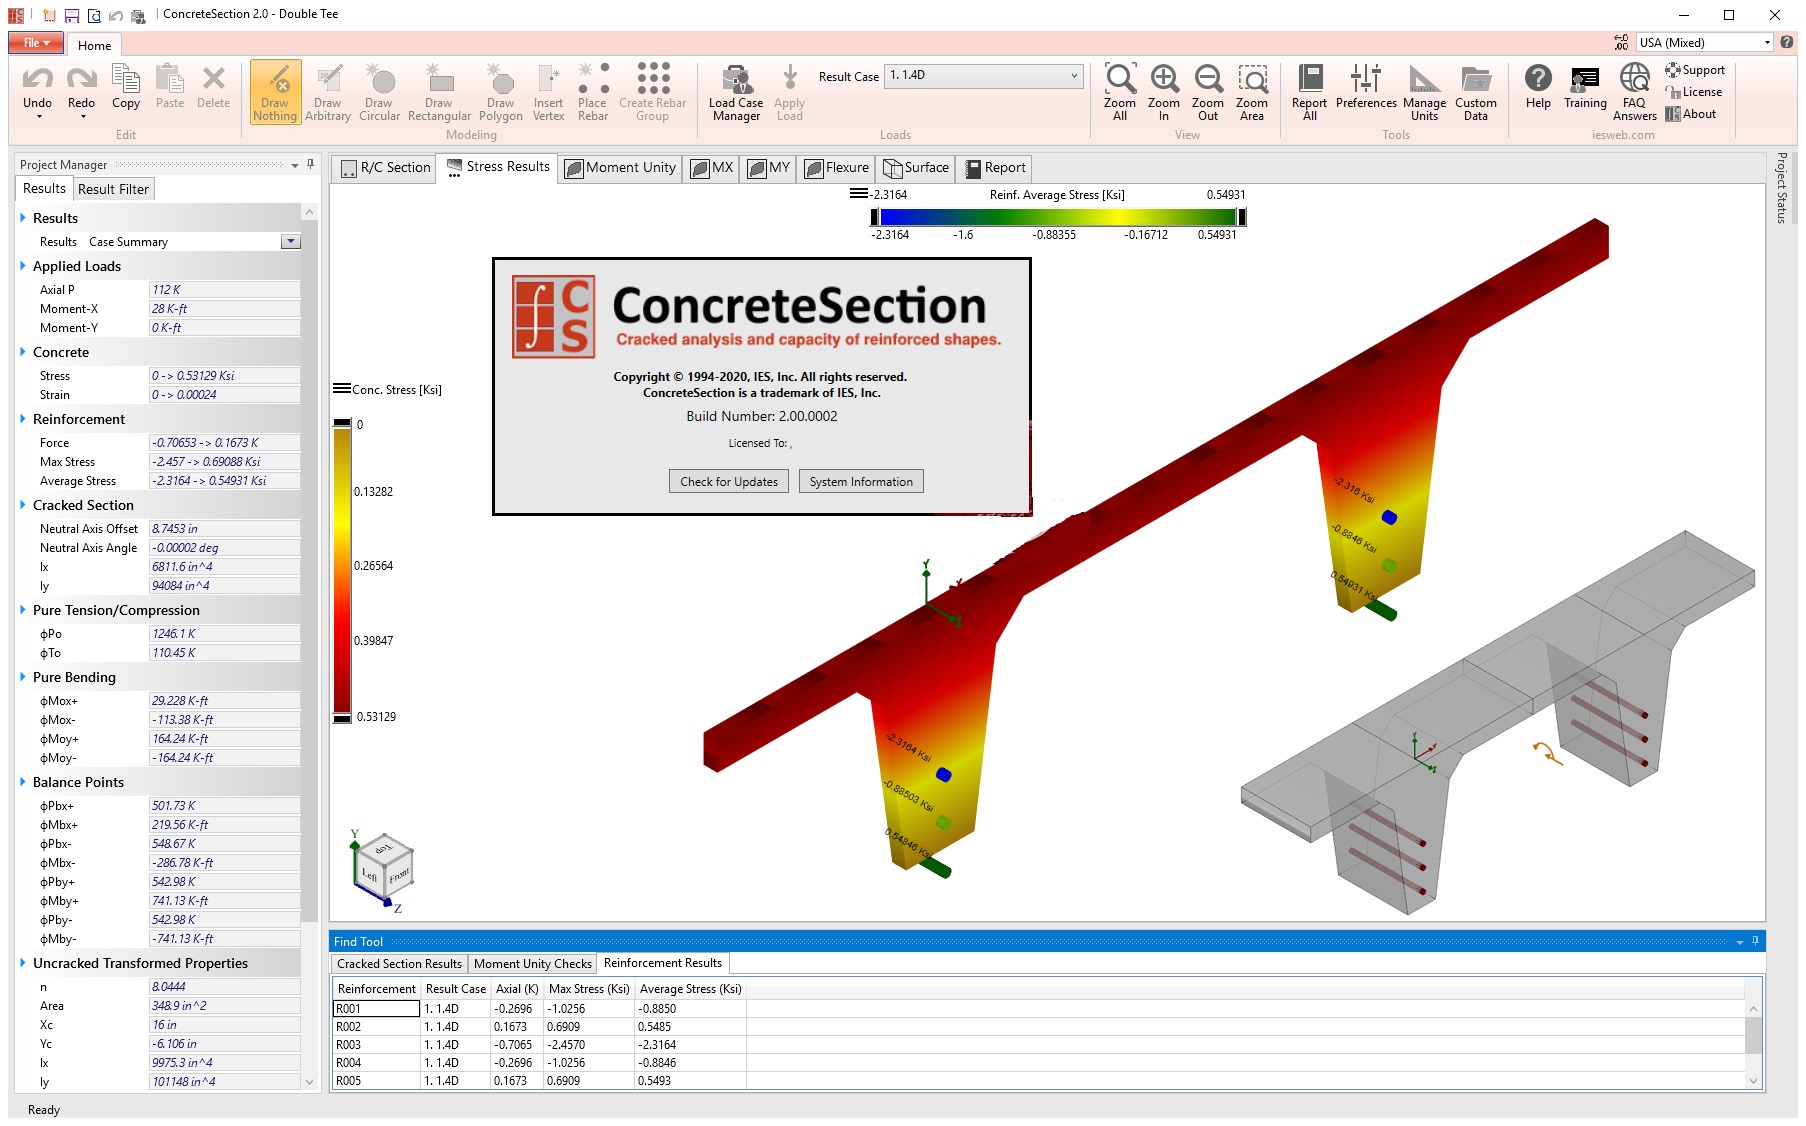 Working with IES ConcreteSection 2.00.0002 full license